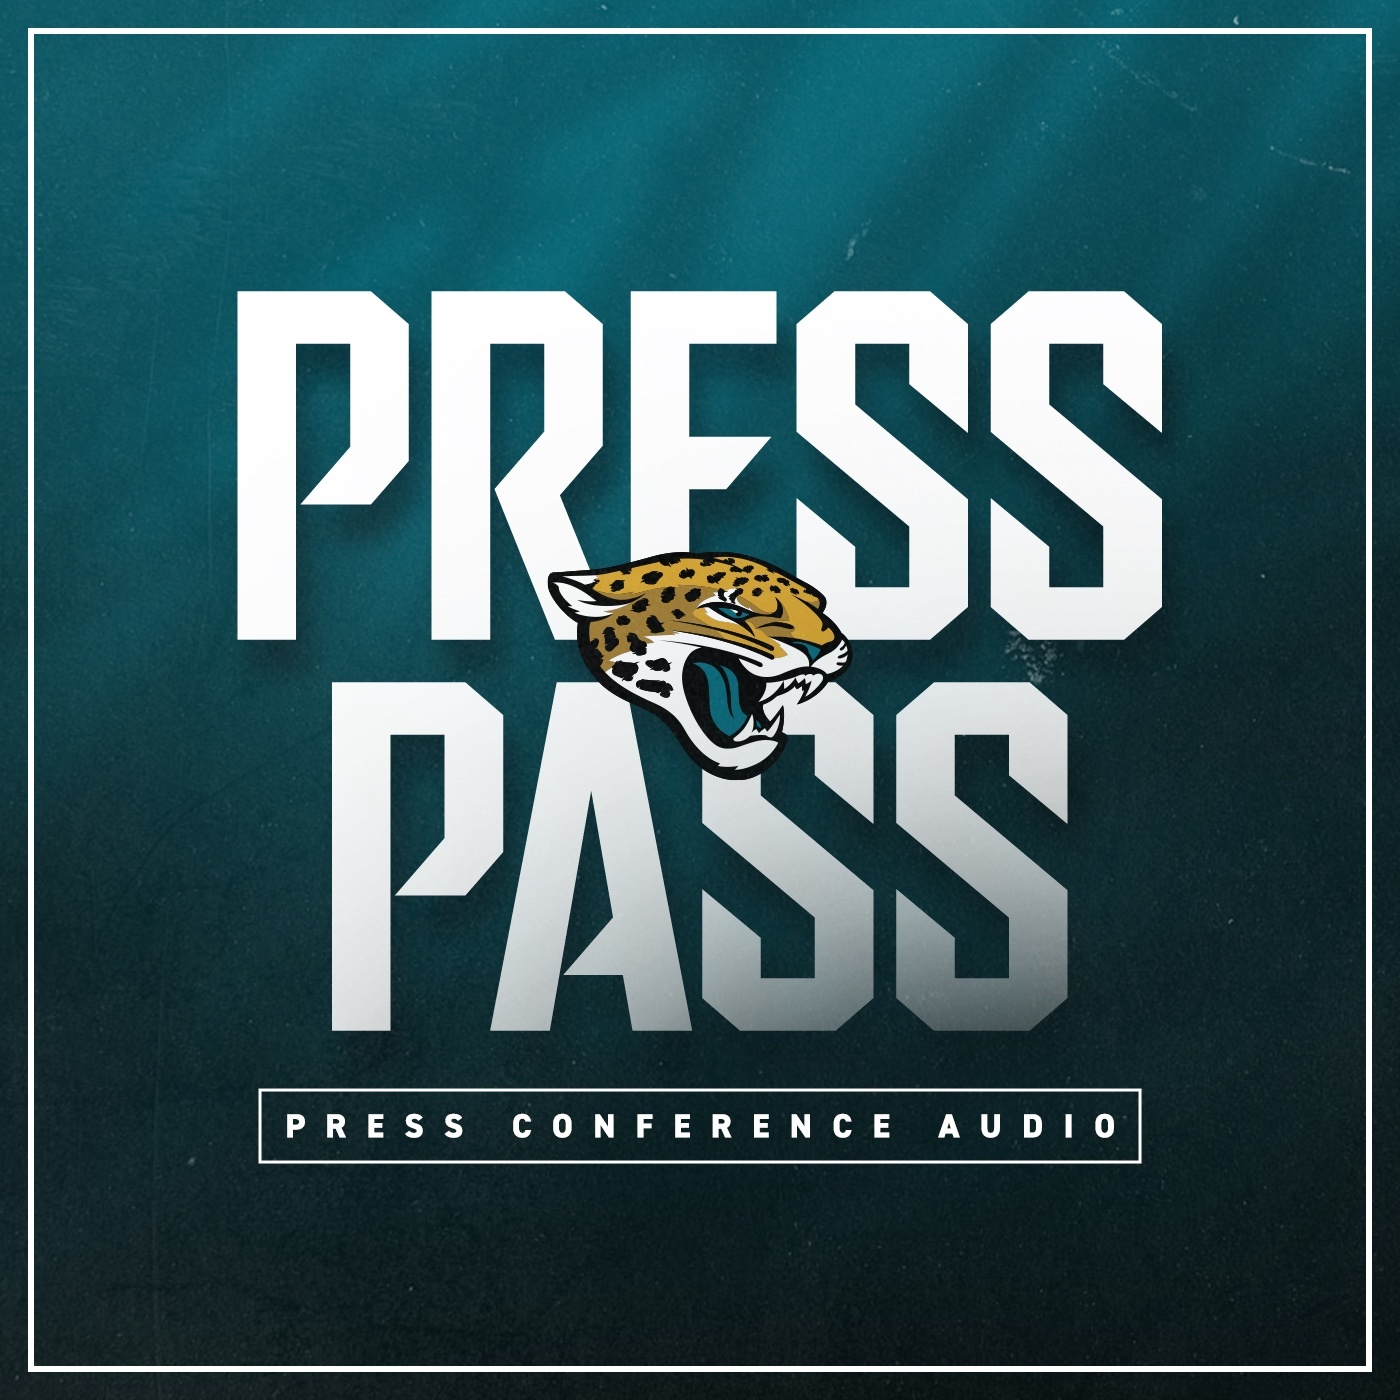 Press Pass | Heath Farwell: "These guys are all in on it..."